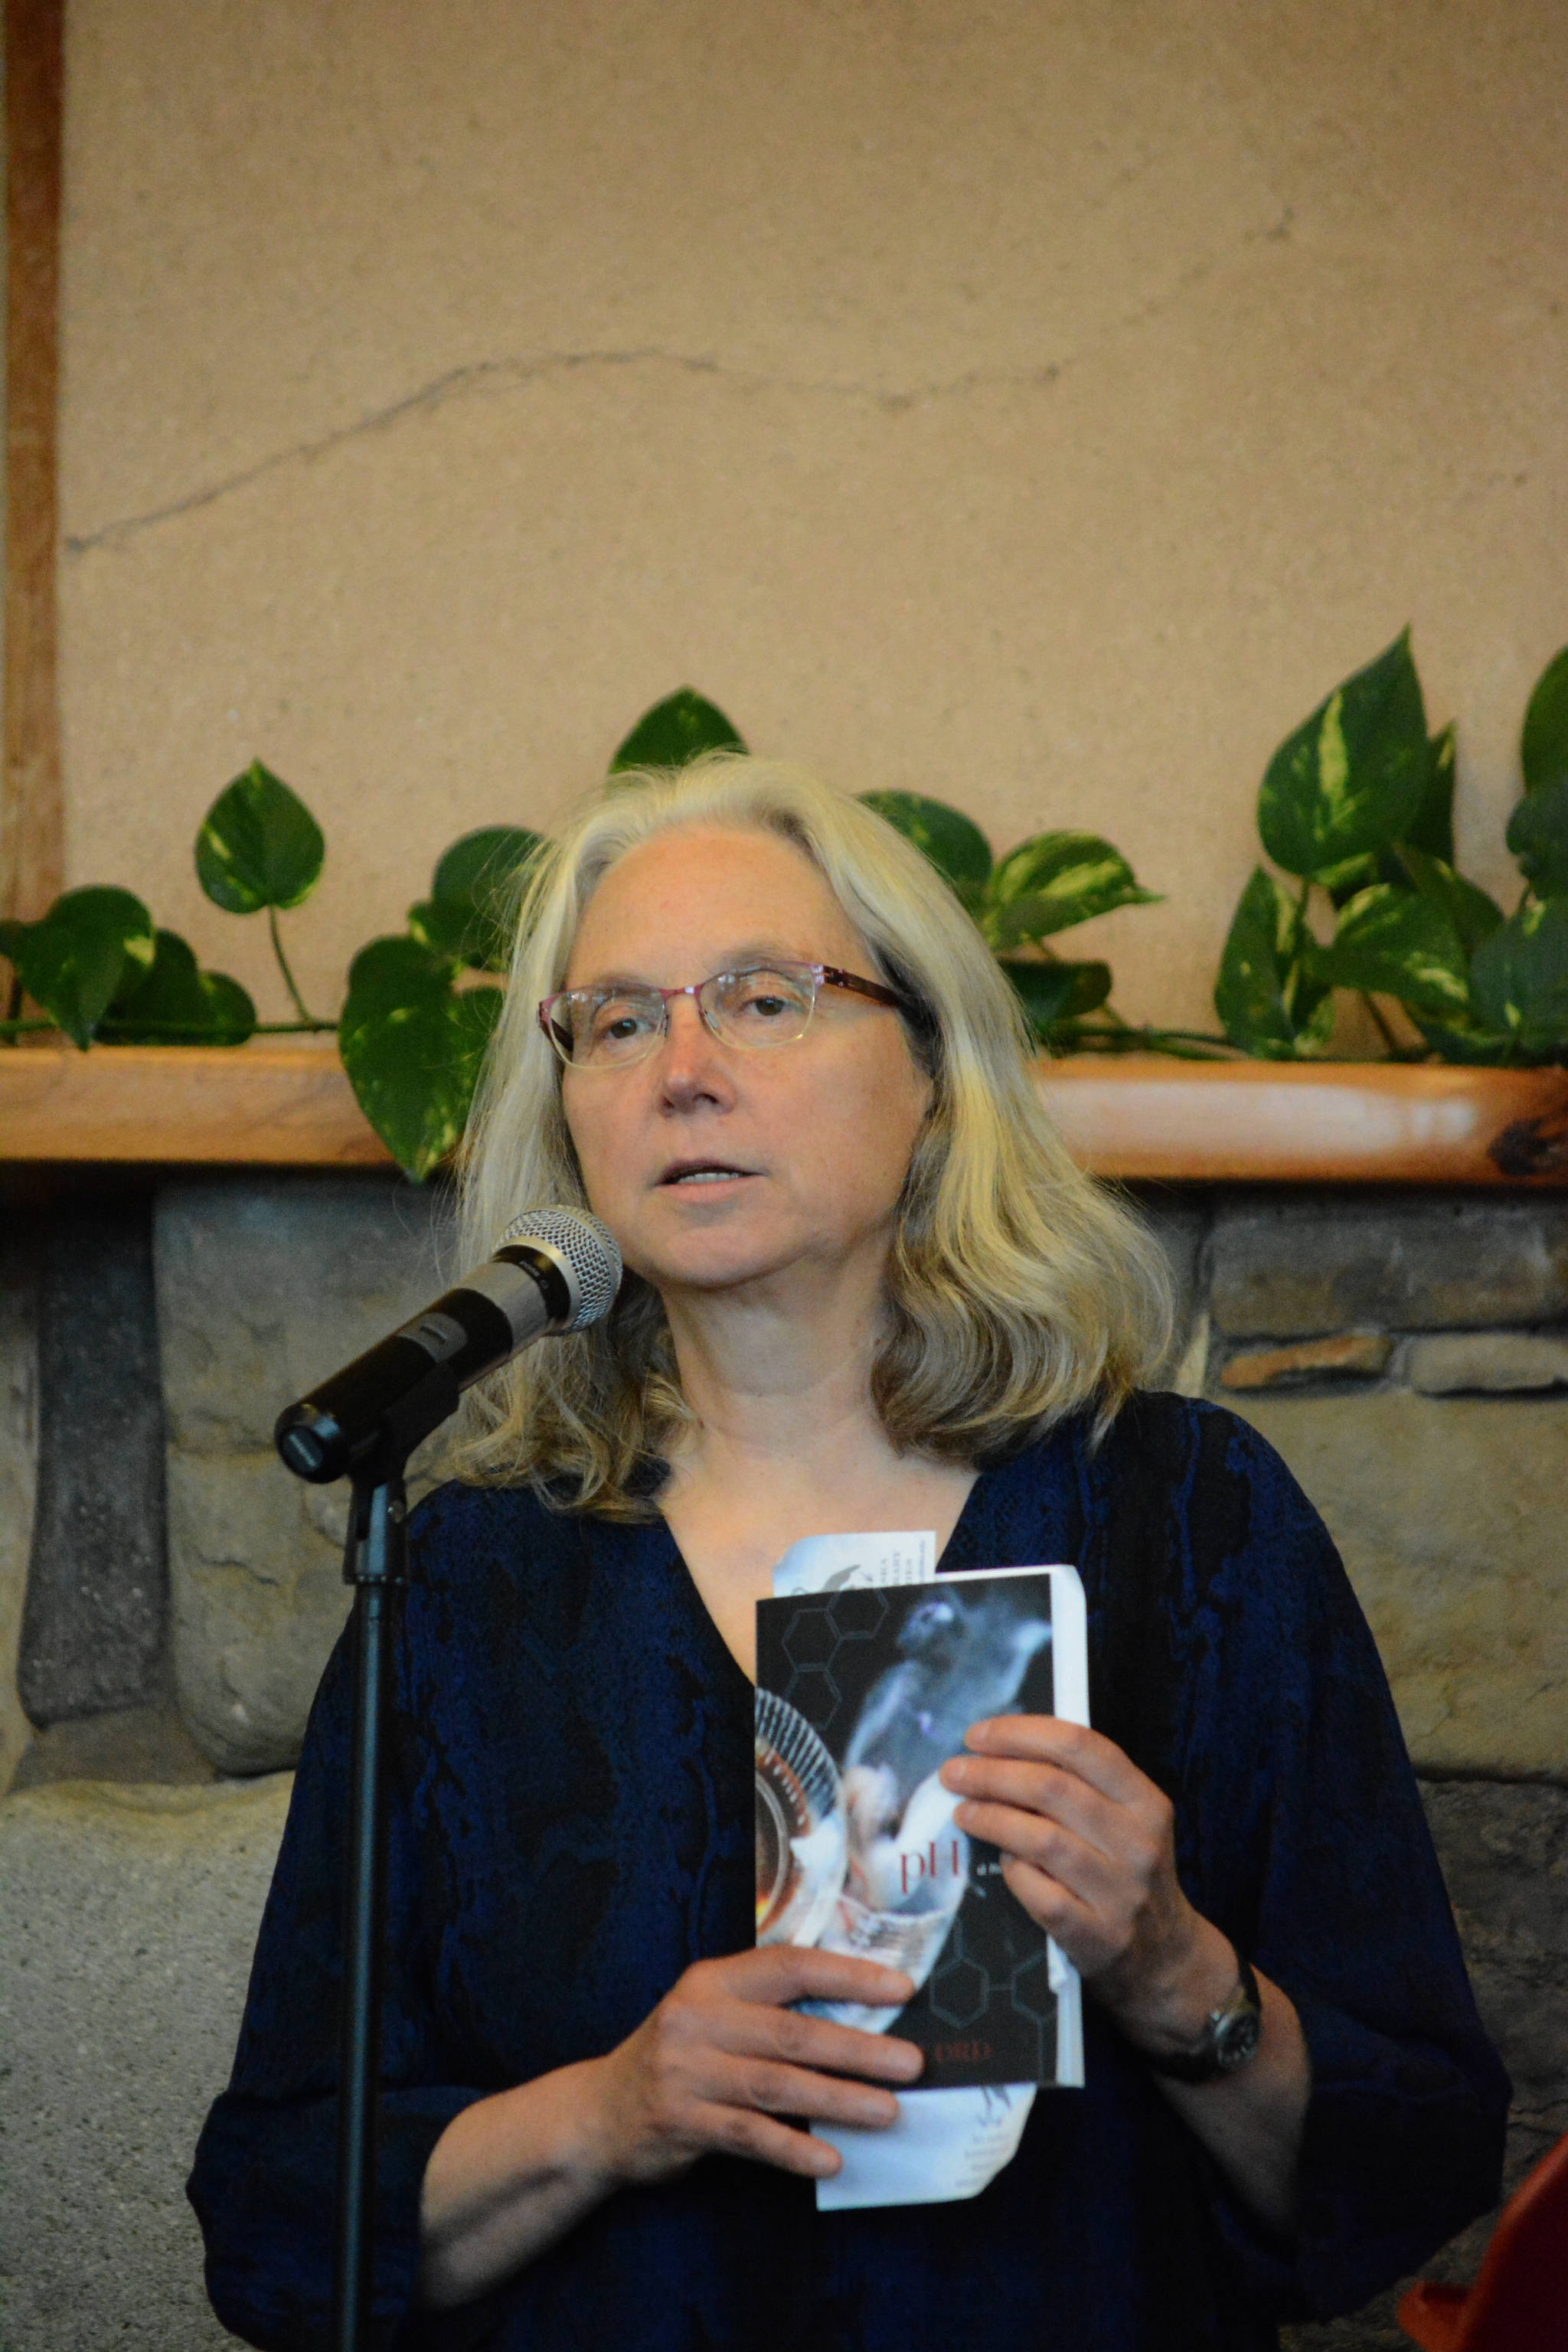 Nancy Lord speaks at the book launch of her new novel, “pH,” on Sept. 15, 2017 at the Homer Public Library. “pH” made No. 2 on the Homer Bookstore’s 2017 best-seller list. (Photo by Michael Armstrong/Homer News)